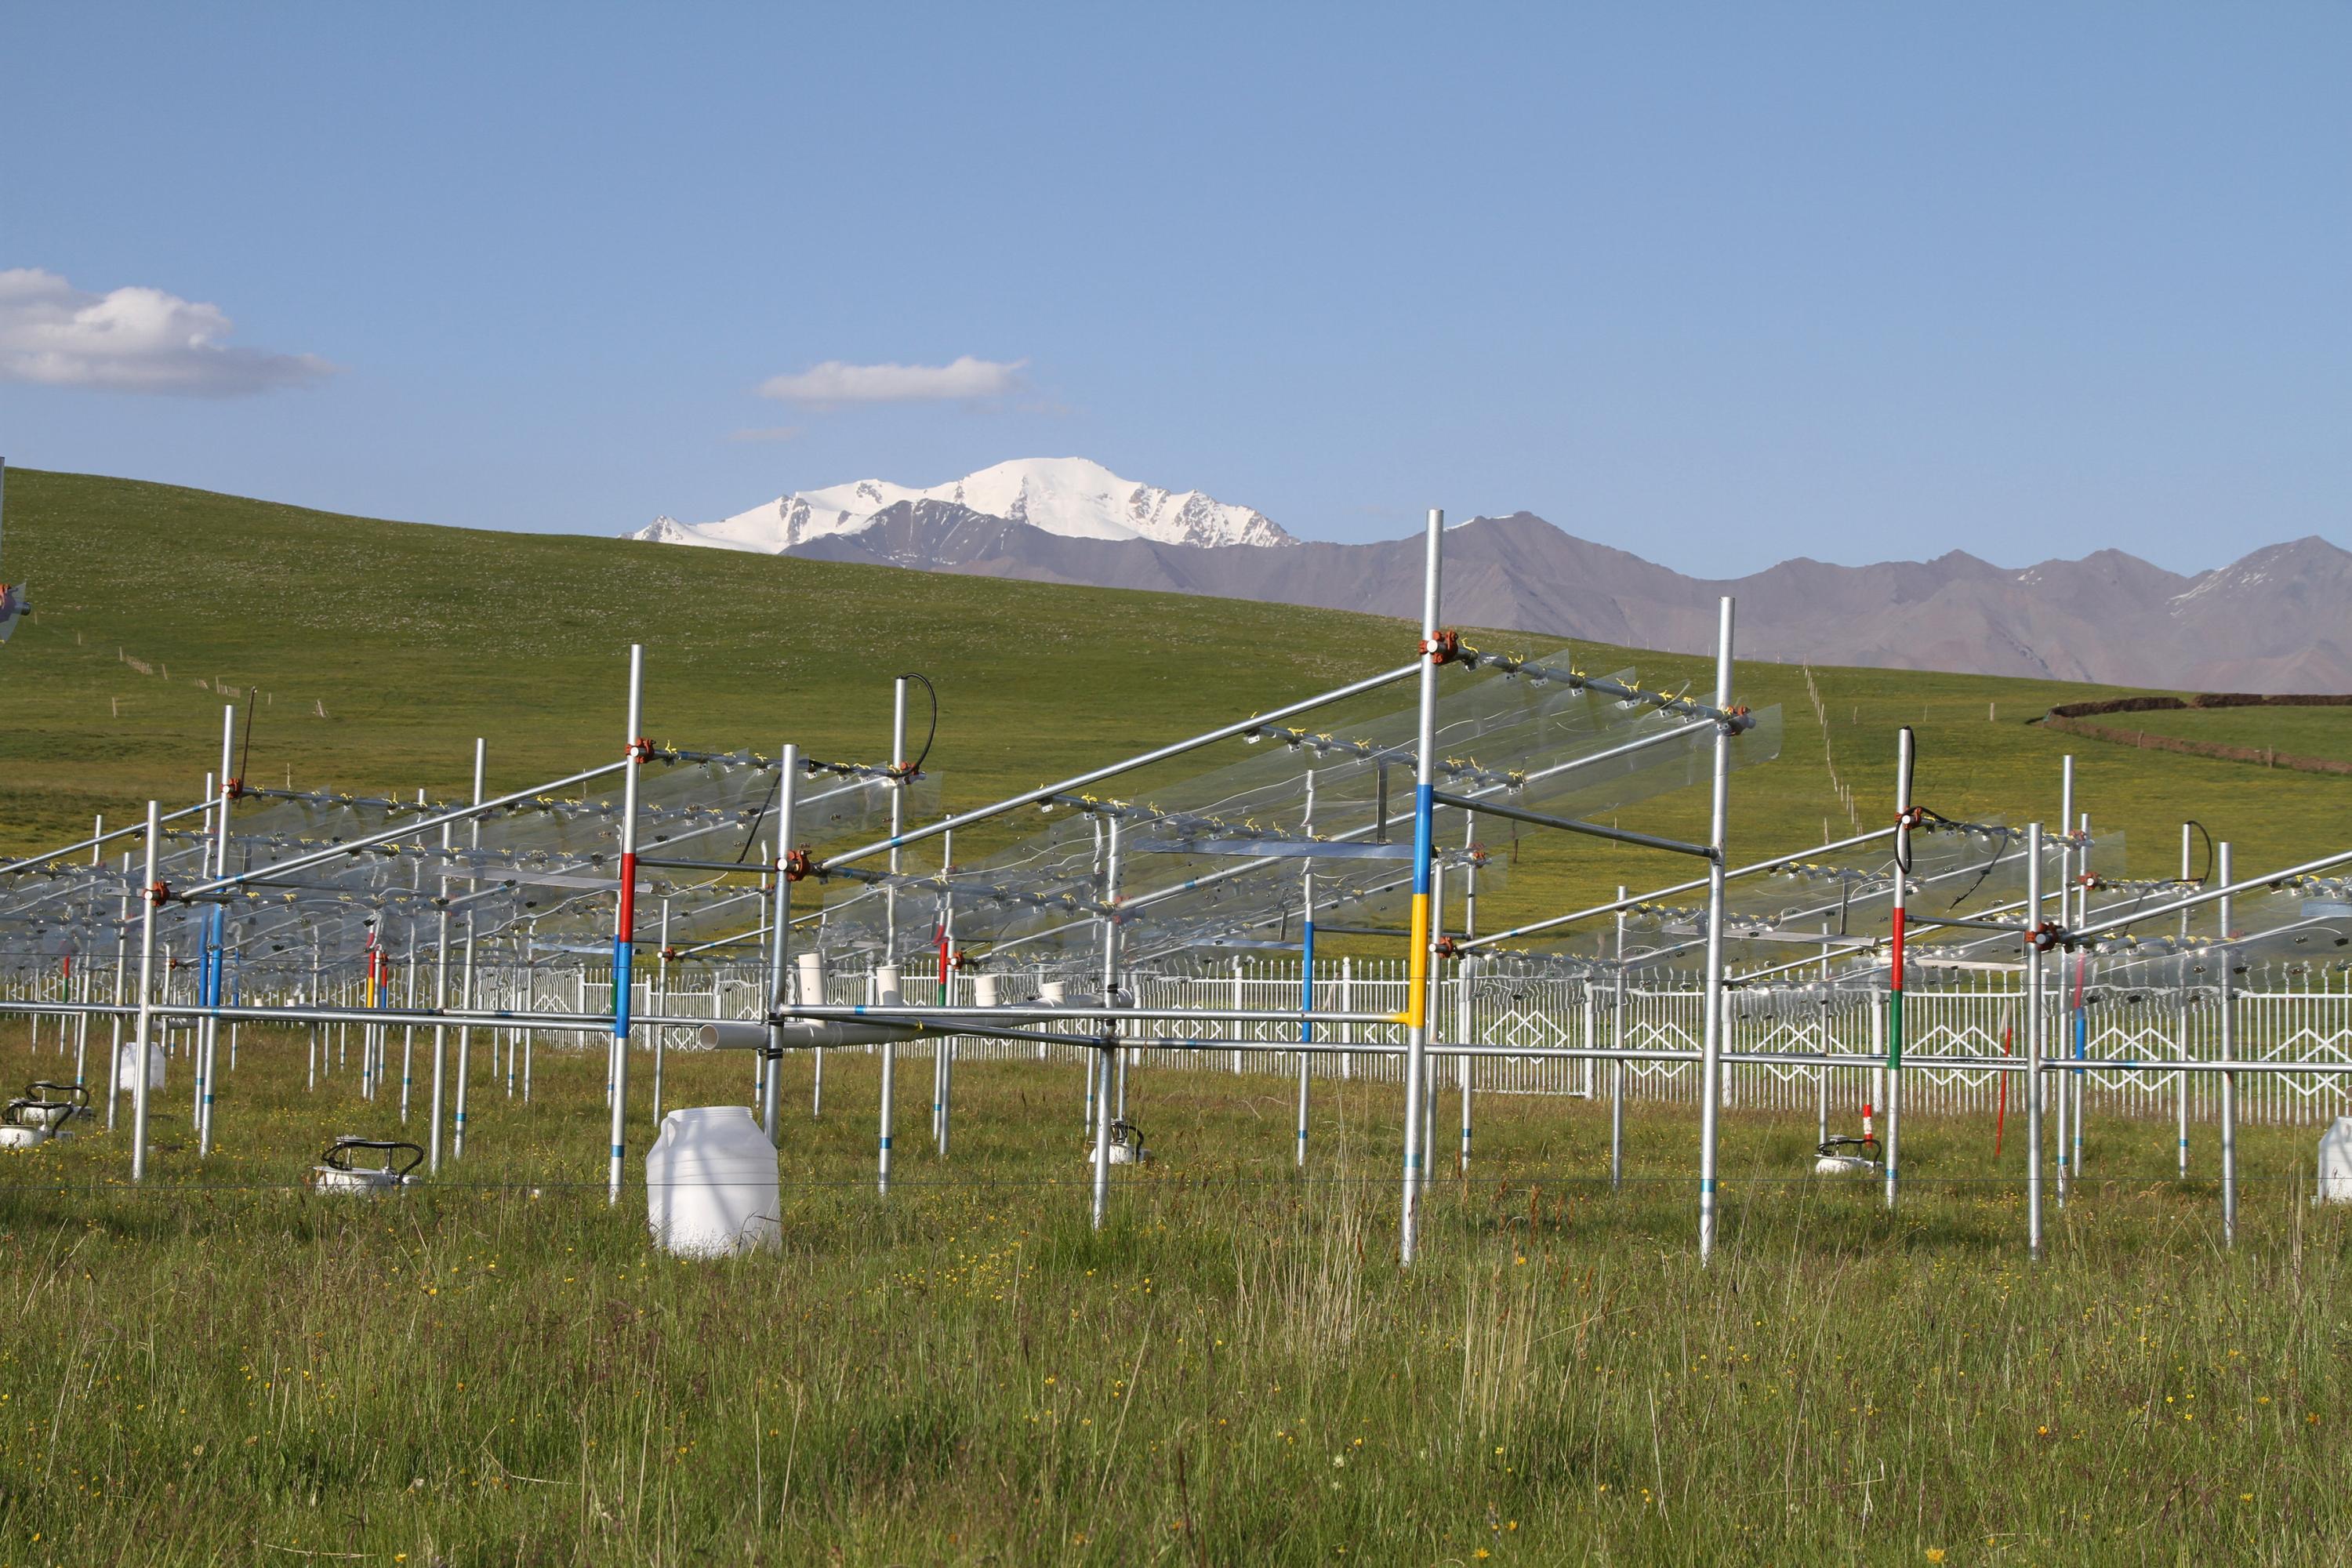 Researchers studied the effects of rising temperatures and varying rainfall on Tibetan Plateau grasslands at this experimental site at the Haibei Alpine Grassland Ecosystem Research Station of the Chinese Academy of Sciences. (Credit: Xian Yang and Qianna Xu)